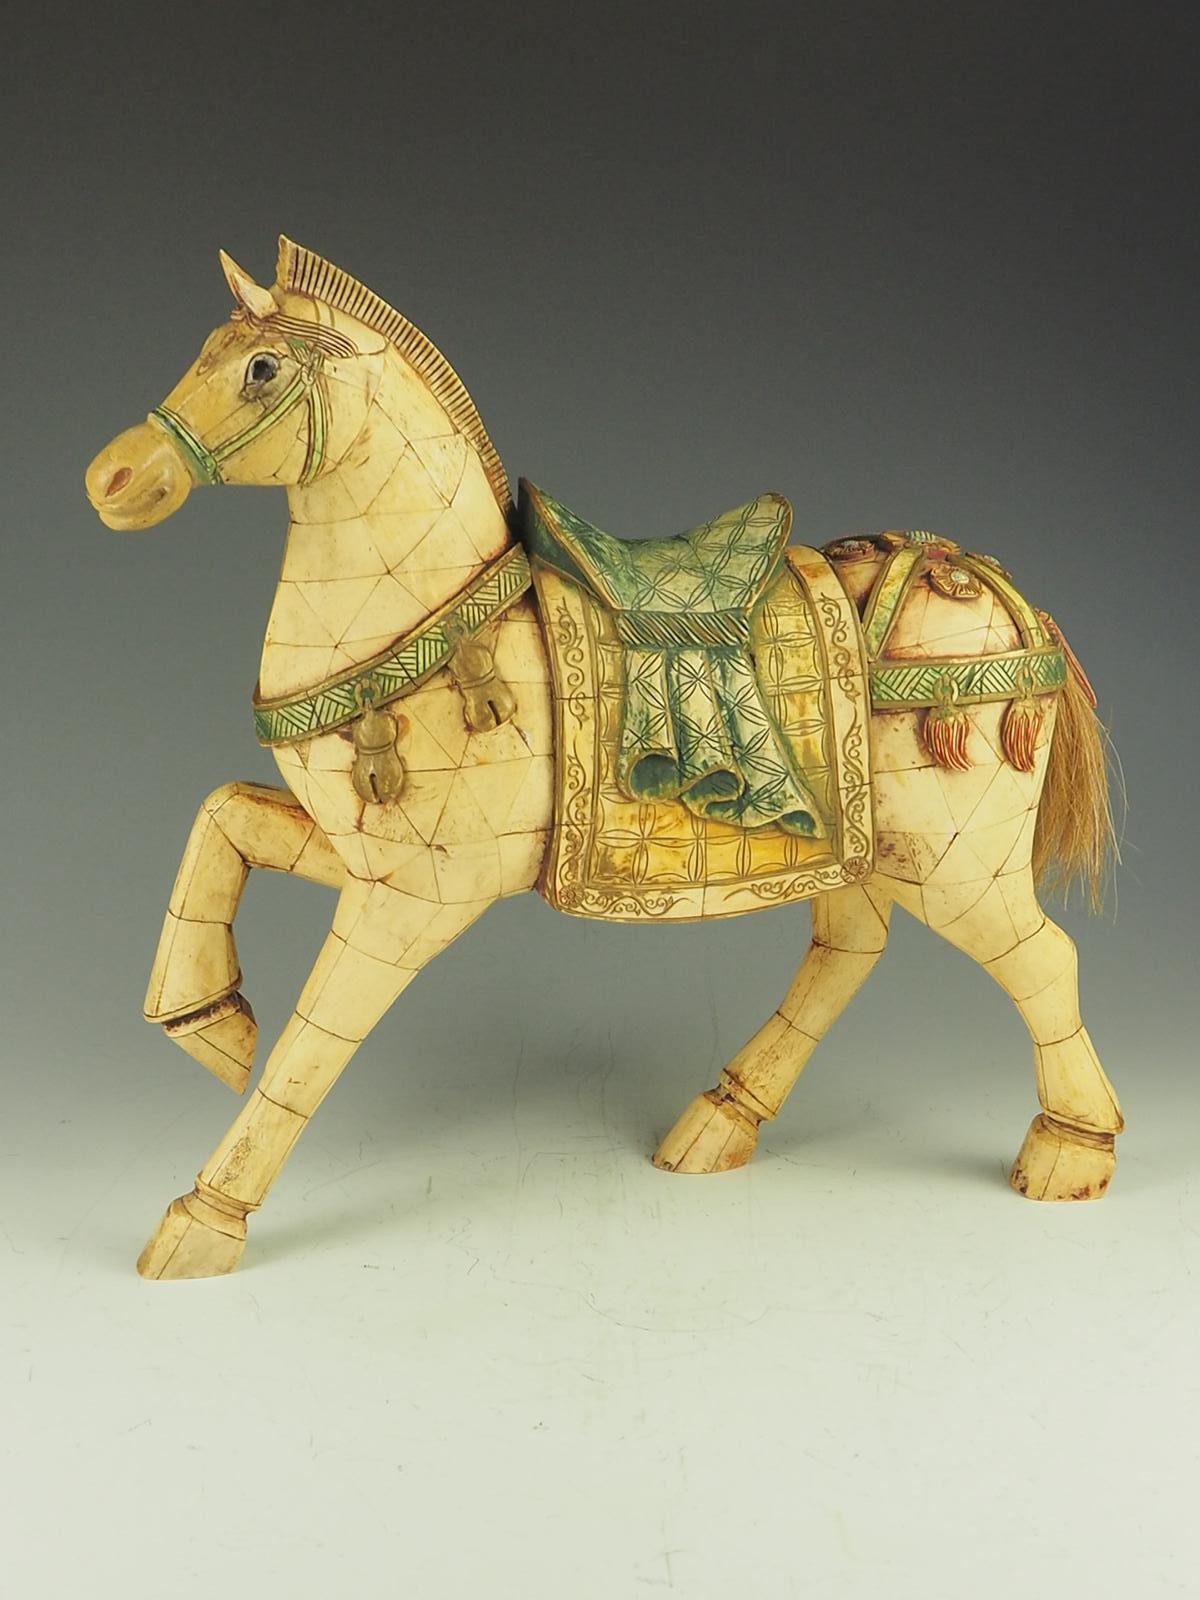 Chinese tessellated bone horse sculpture circa 1950s.

Modeled after an actual horse discovered during the “Tang Dynasty” period, 618-906 A.D.